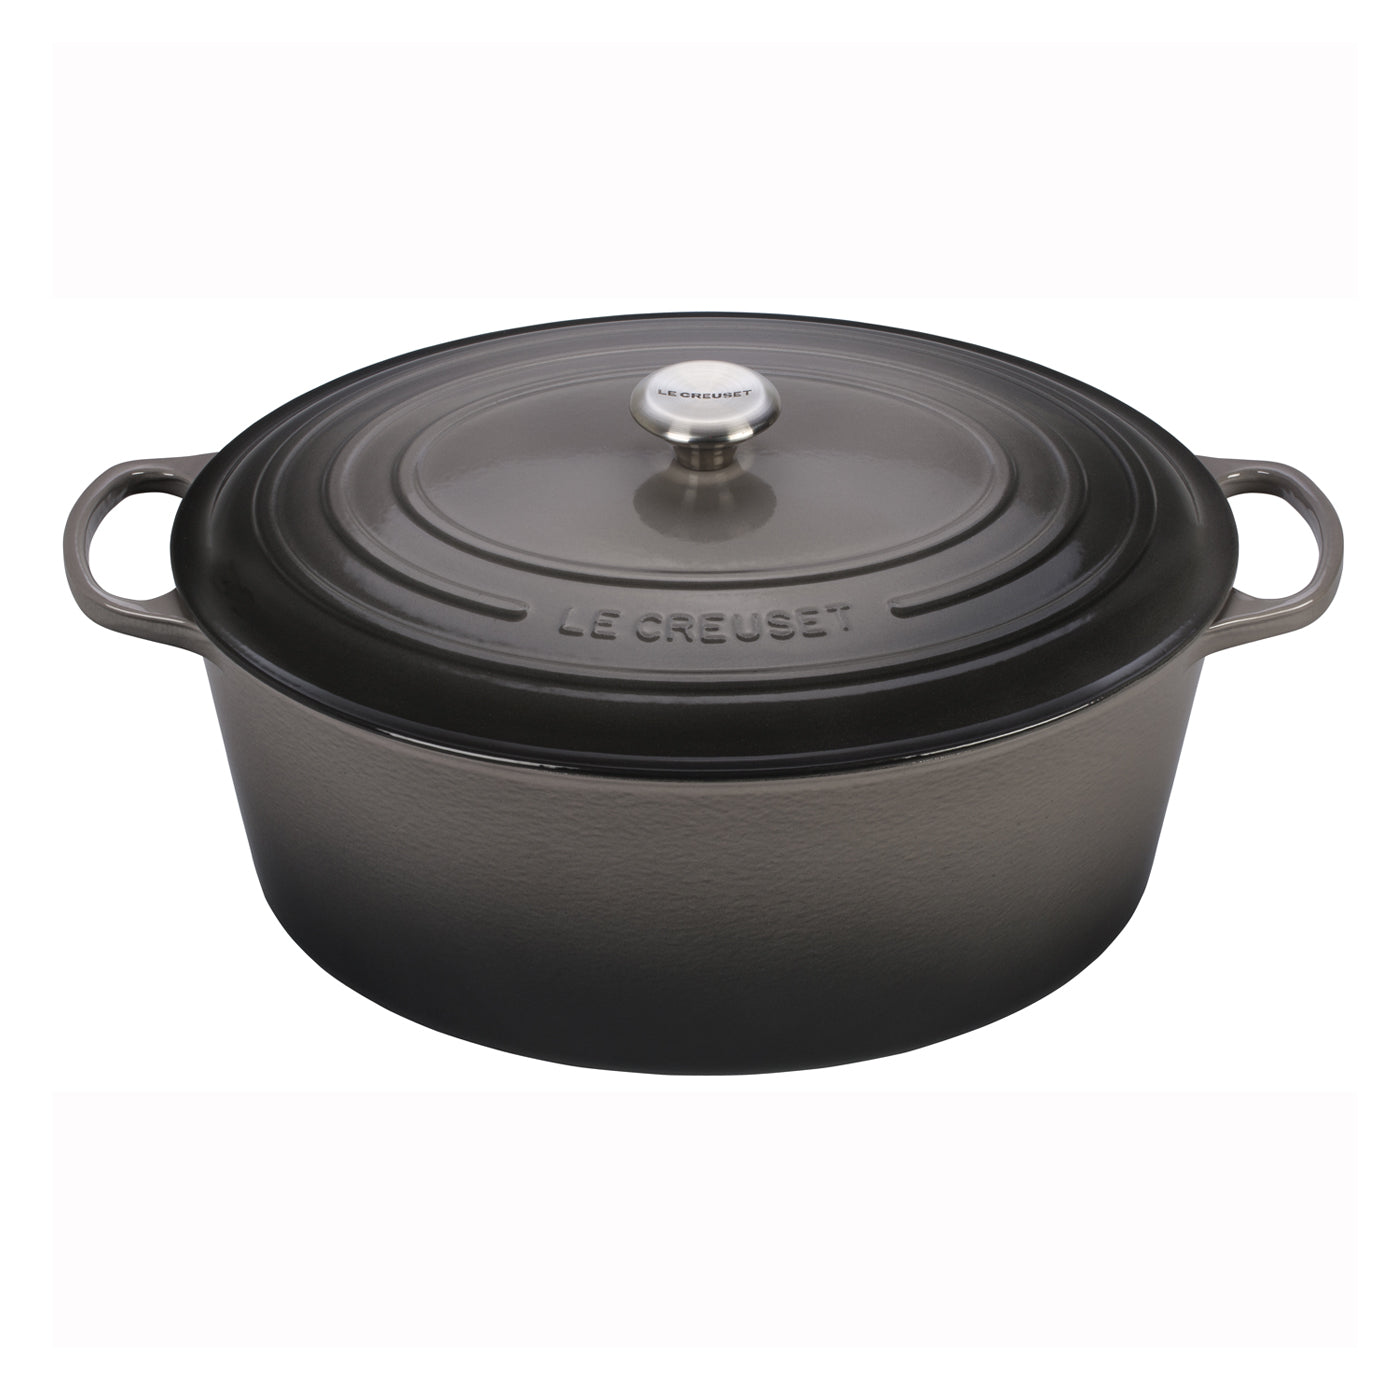 Le Creuset 15 1/2 Qt. Signature Oval Dutch Oven w/Stainless Steel